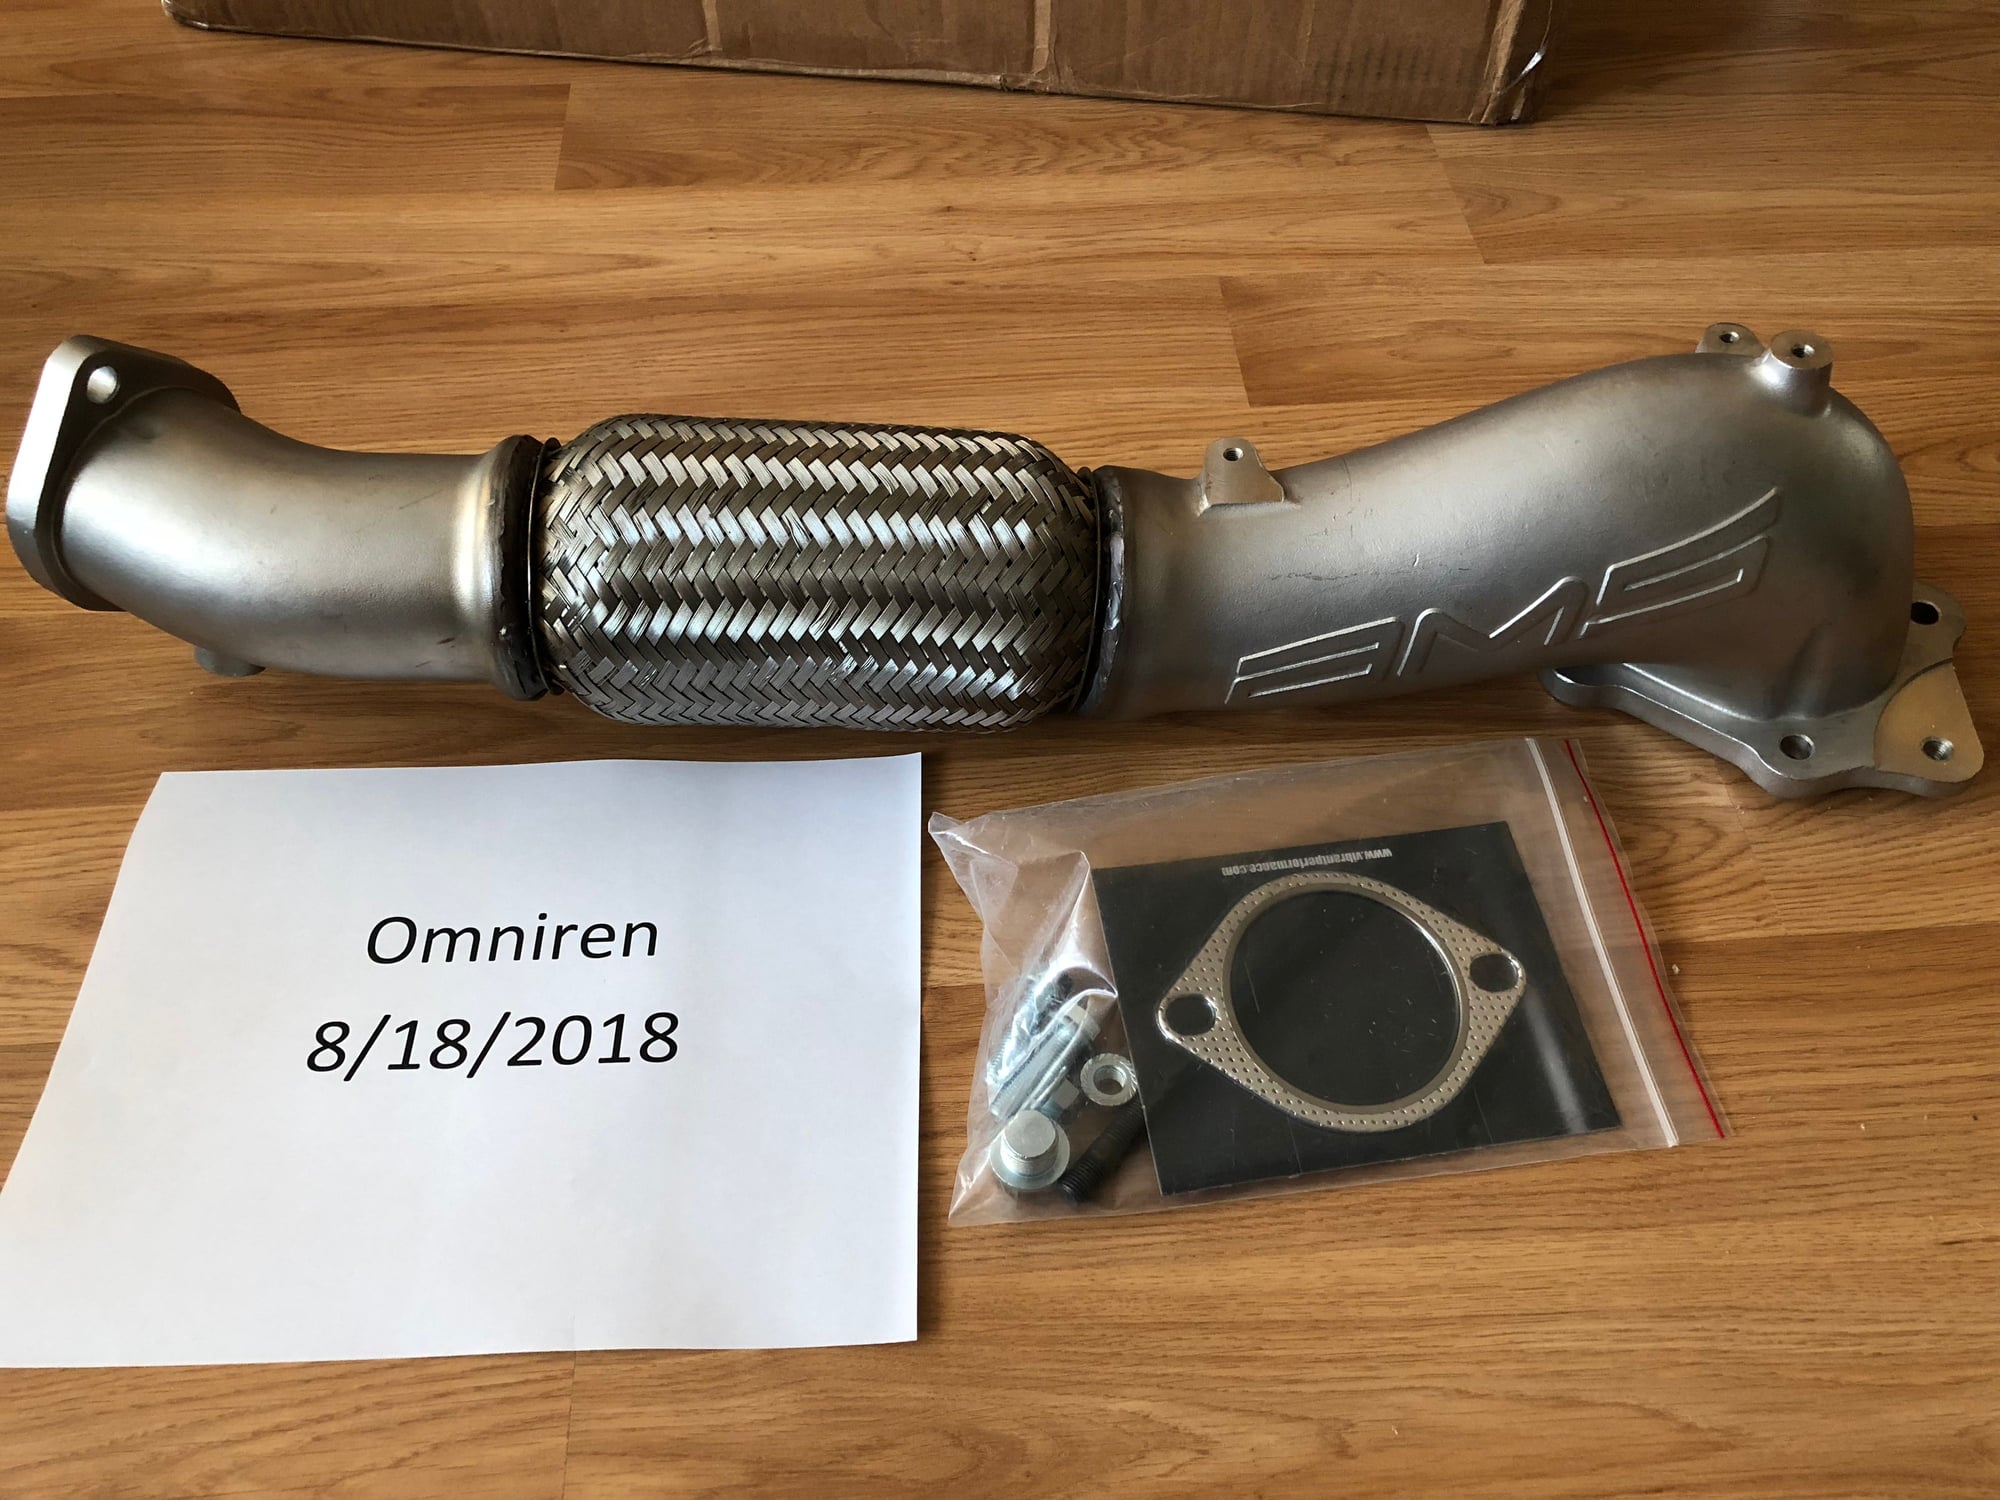 Engine - Exhaust - Brand New AMS Widemouth Downpipe - New - 2008 to 2015 Mitsubishi Lancer Evolution - Elmwood Park, IL 60707, United States